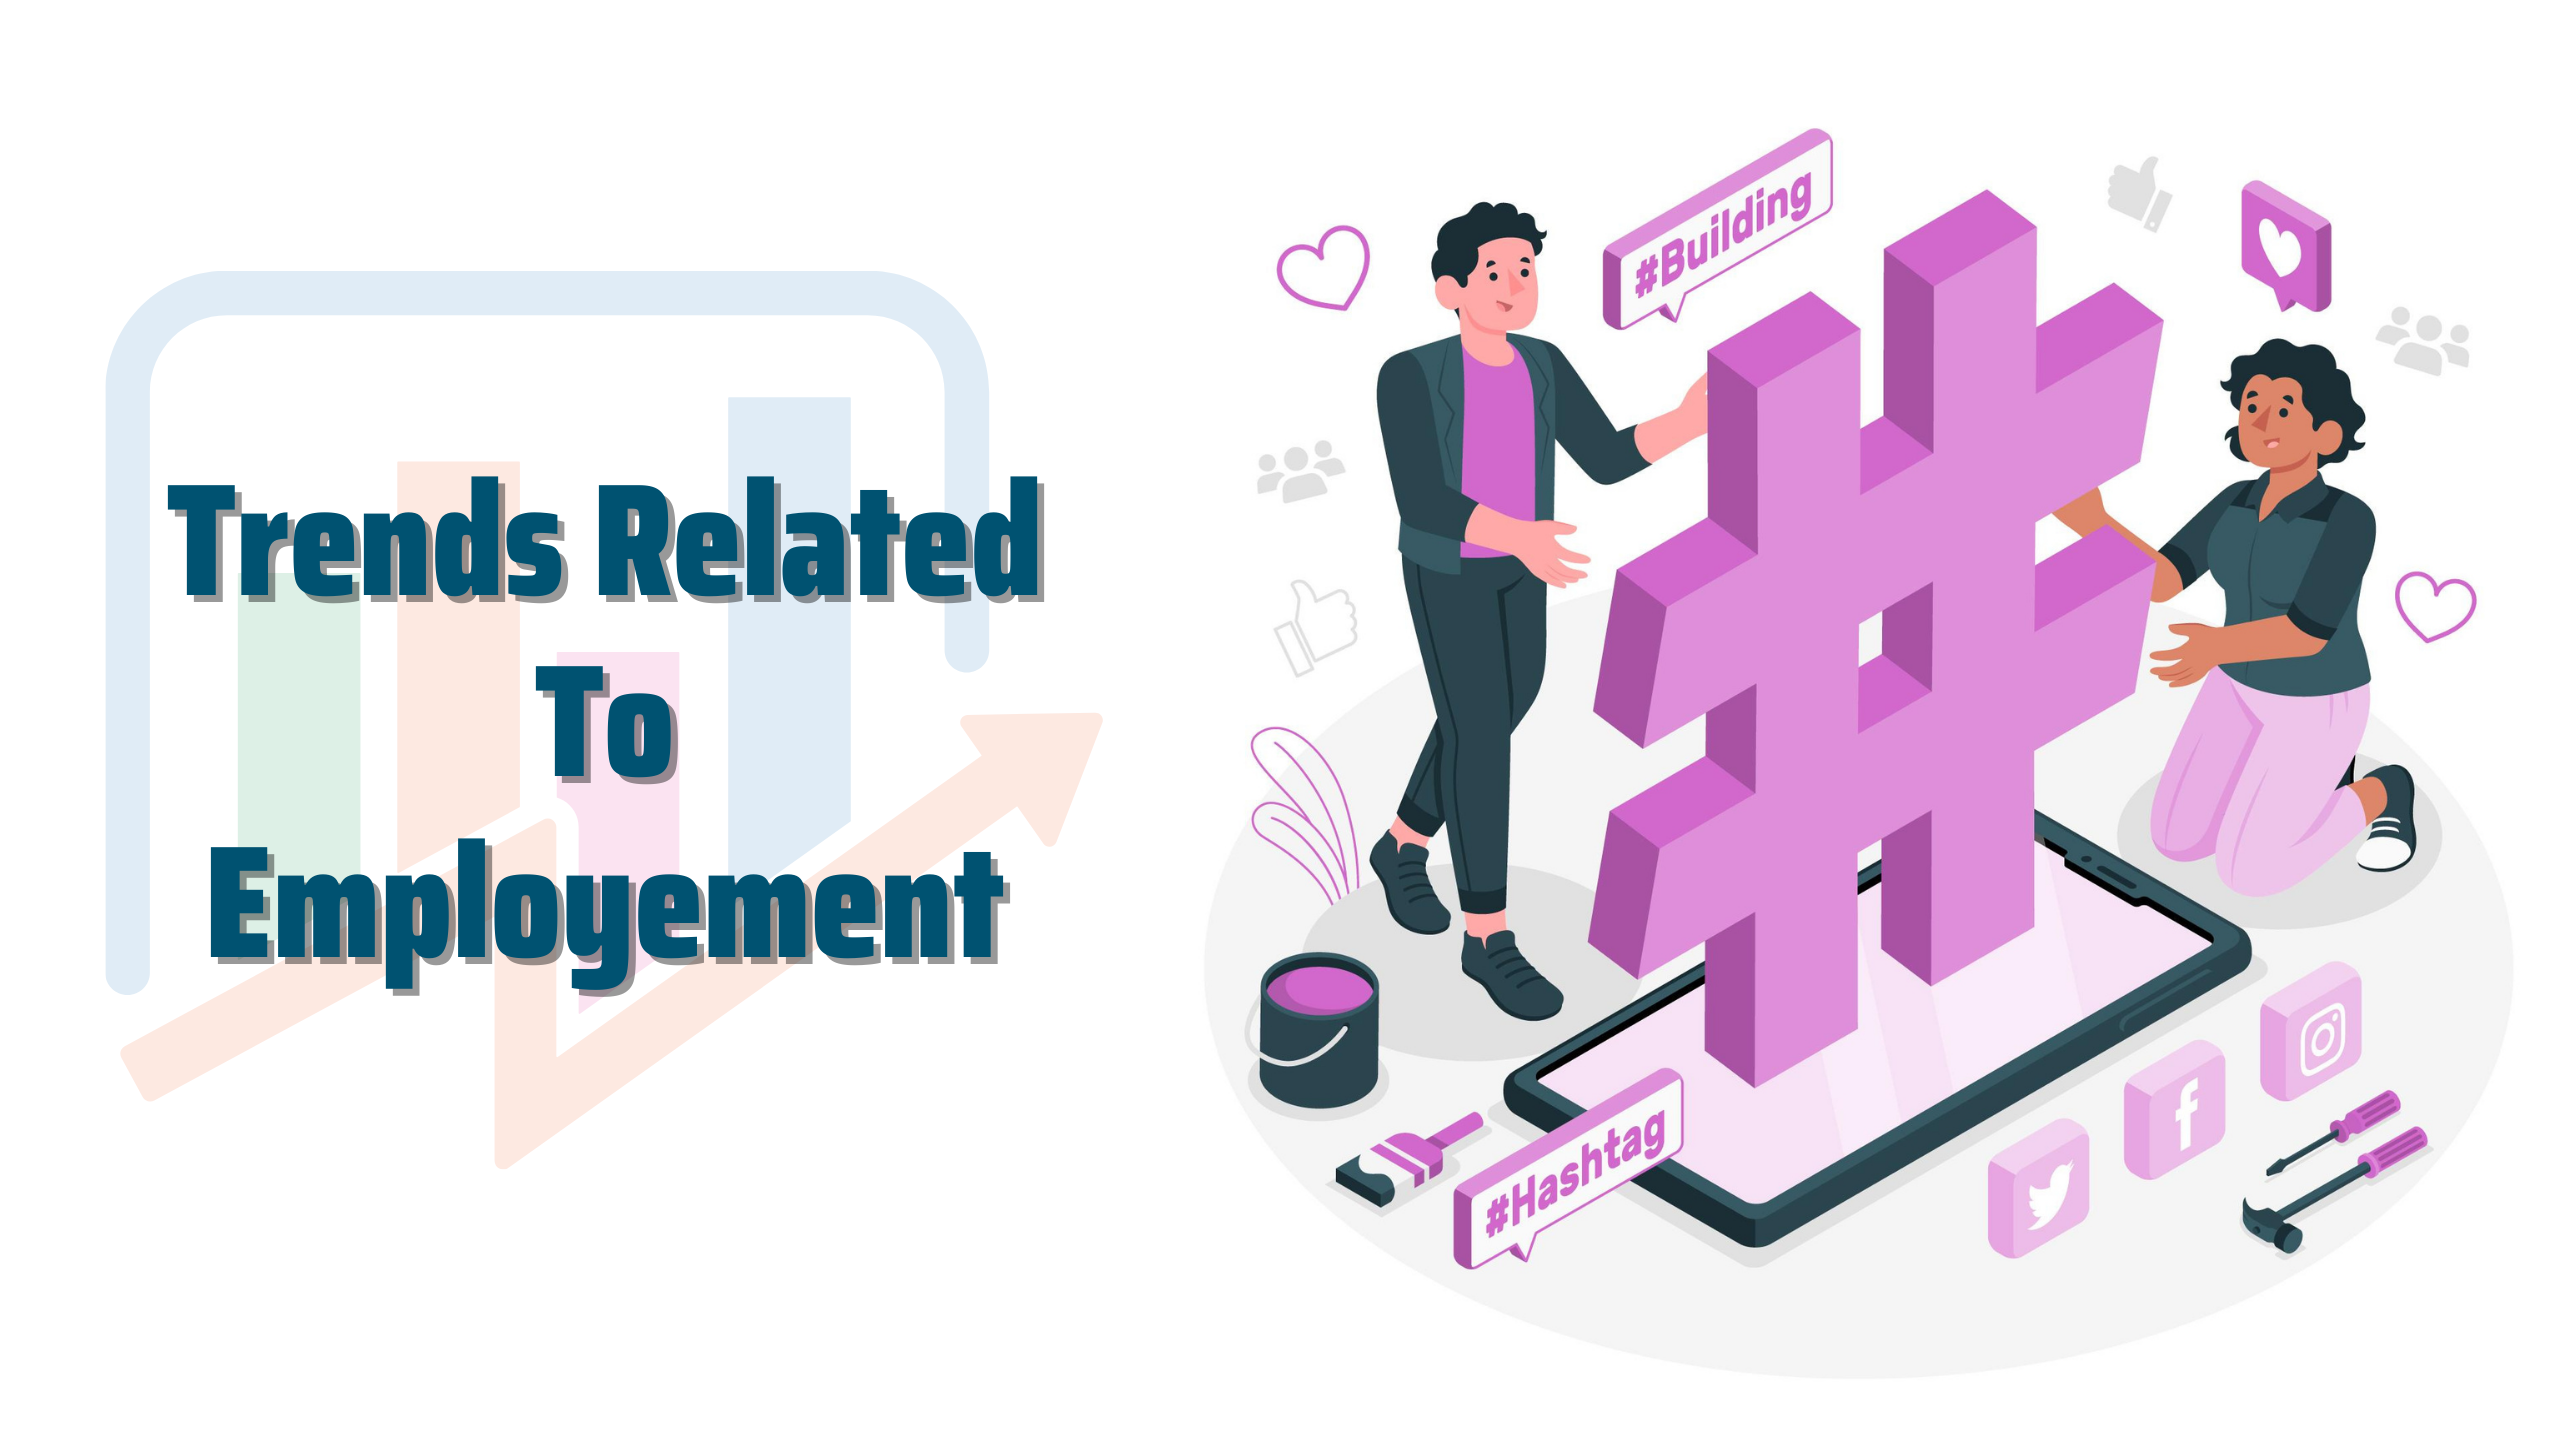 Employee engagement is a difficult notion to grasp. It's the "emotional connection" that an employee has with their company. 